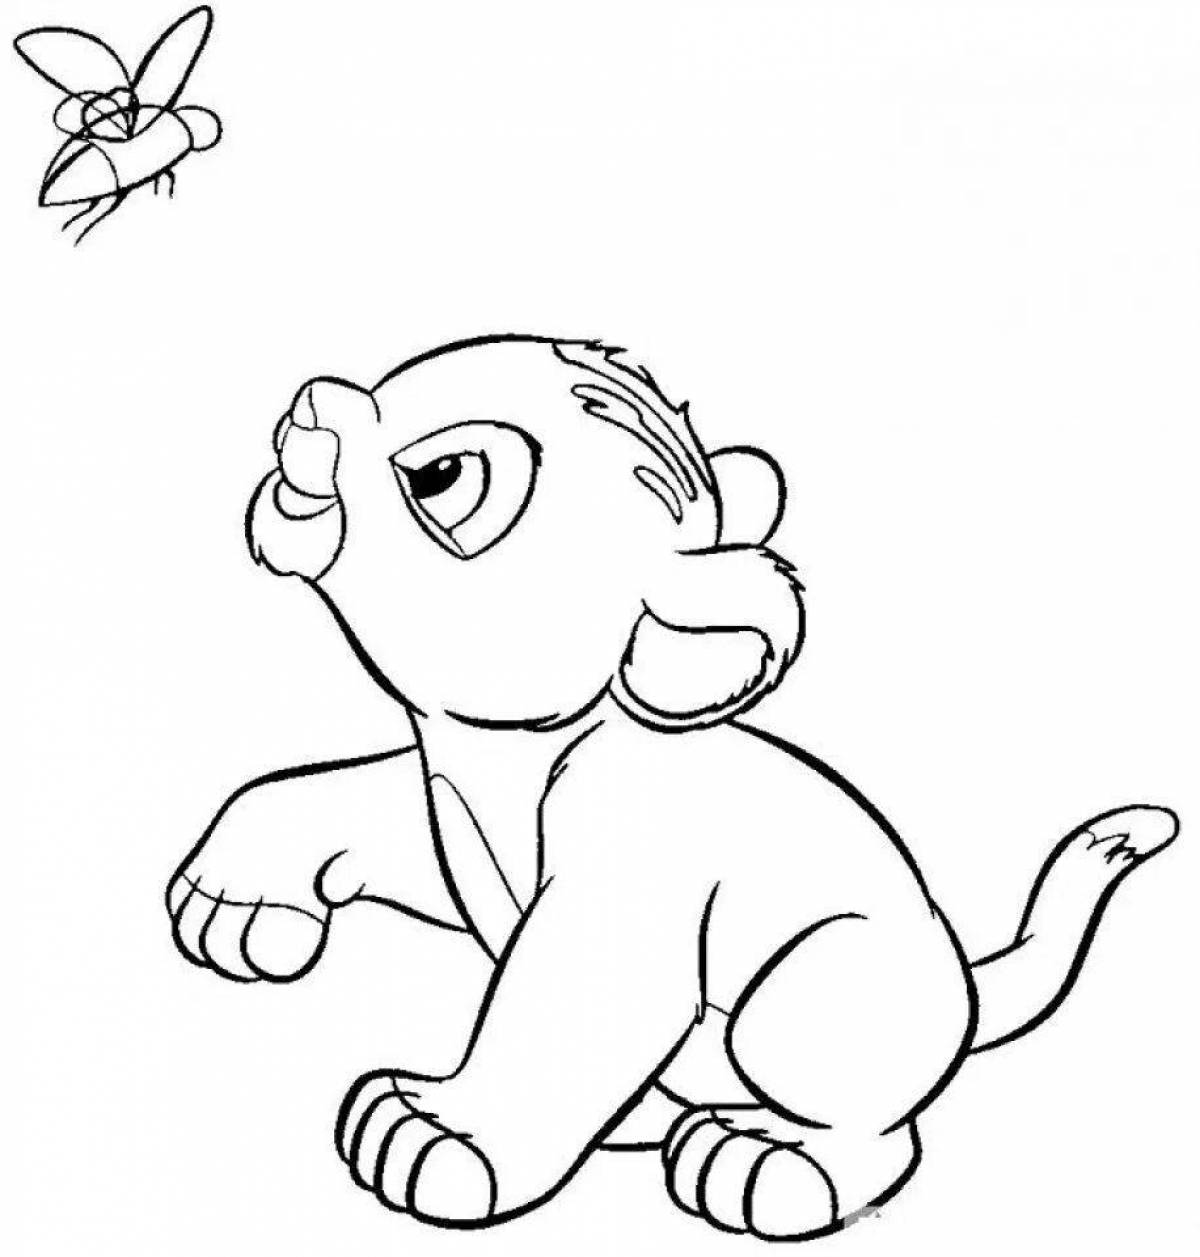 Simba live coloring for kids